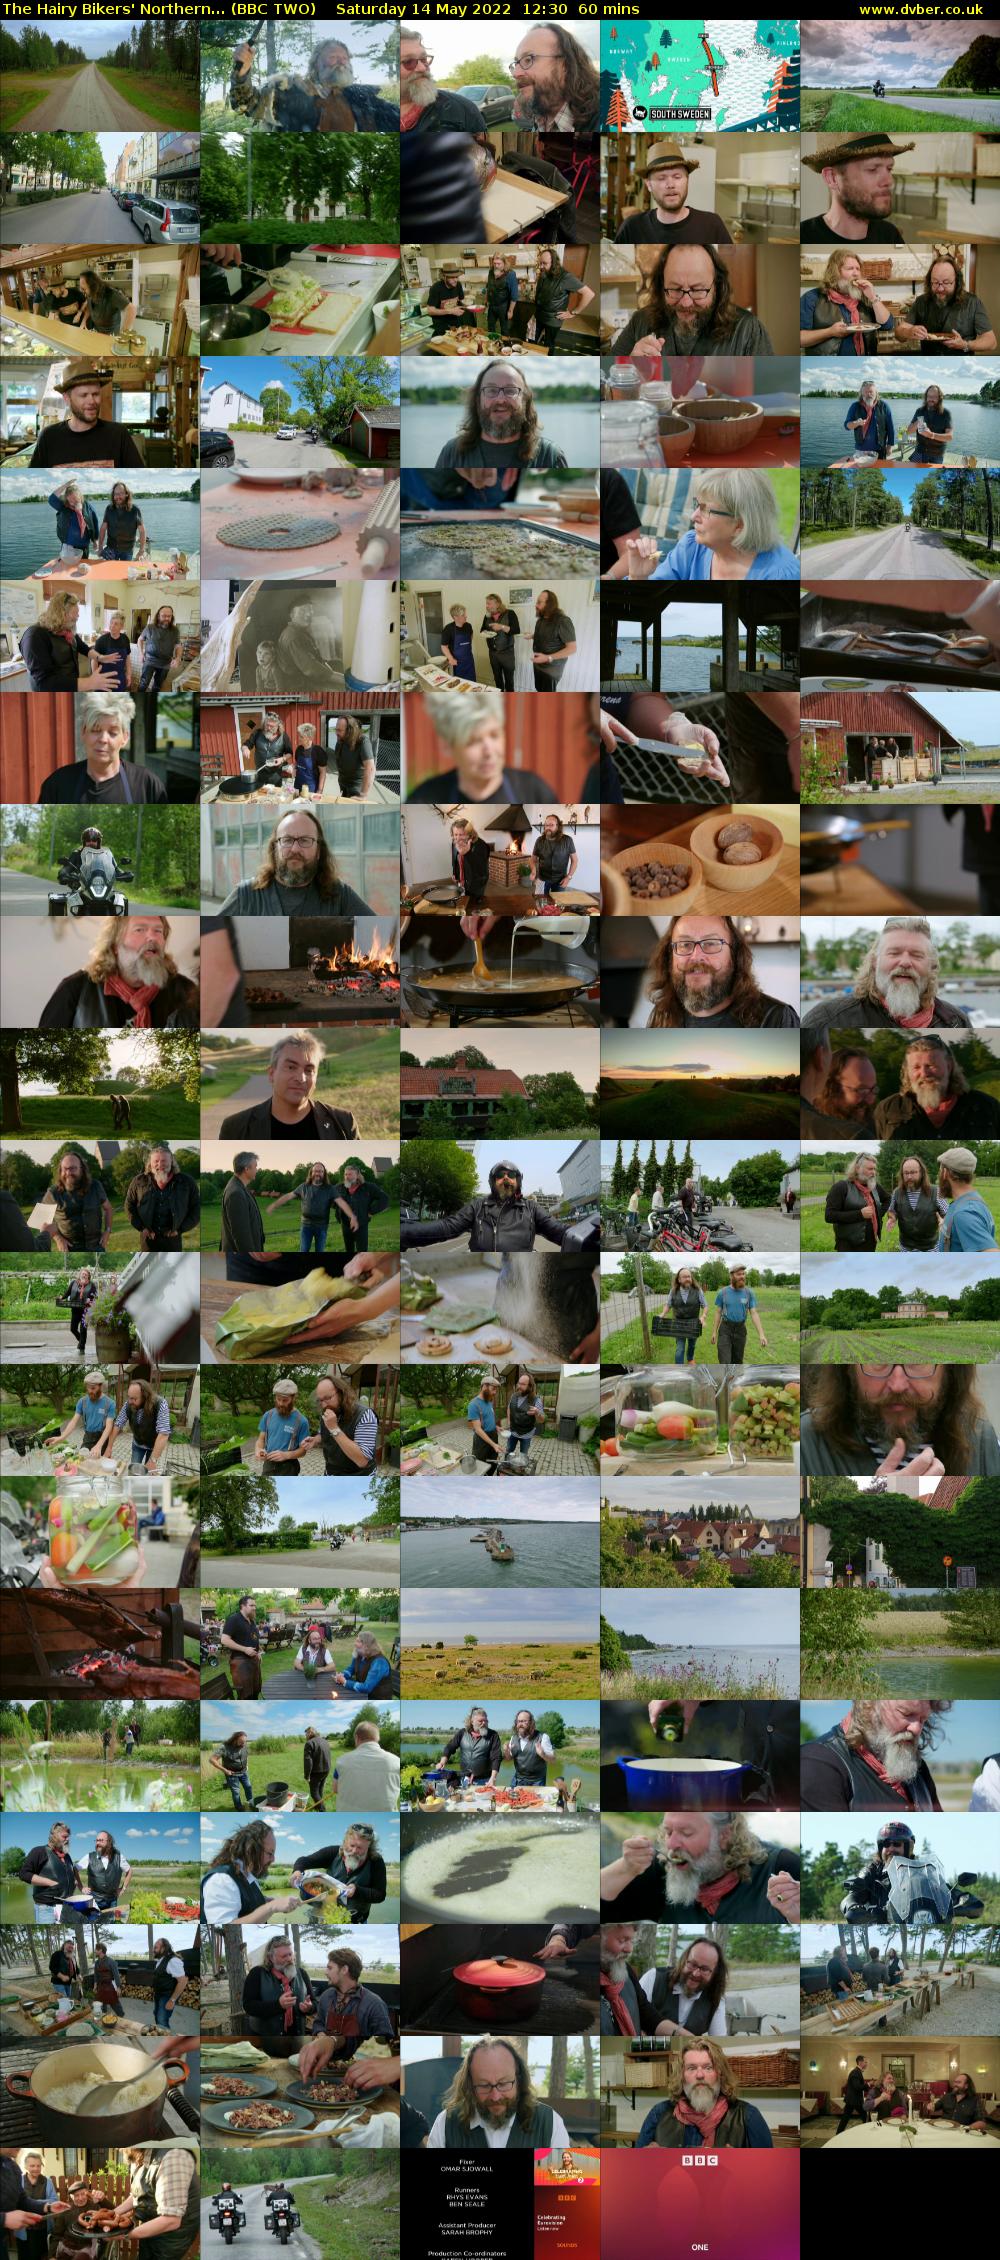 The Hairy Bikers' Northern... (BBC TWO) Saturday 14 May 2022 12:30 - 13:30